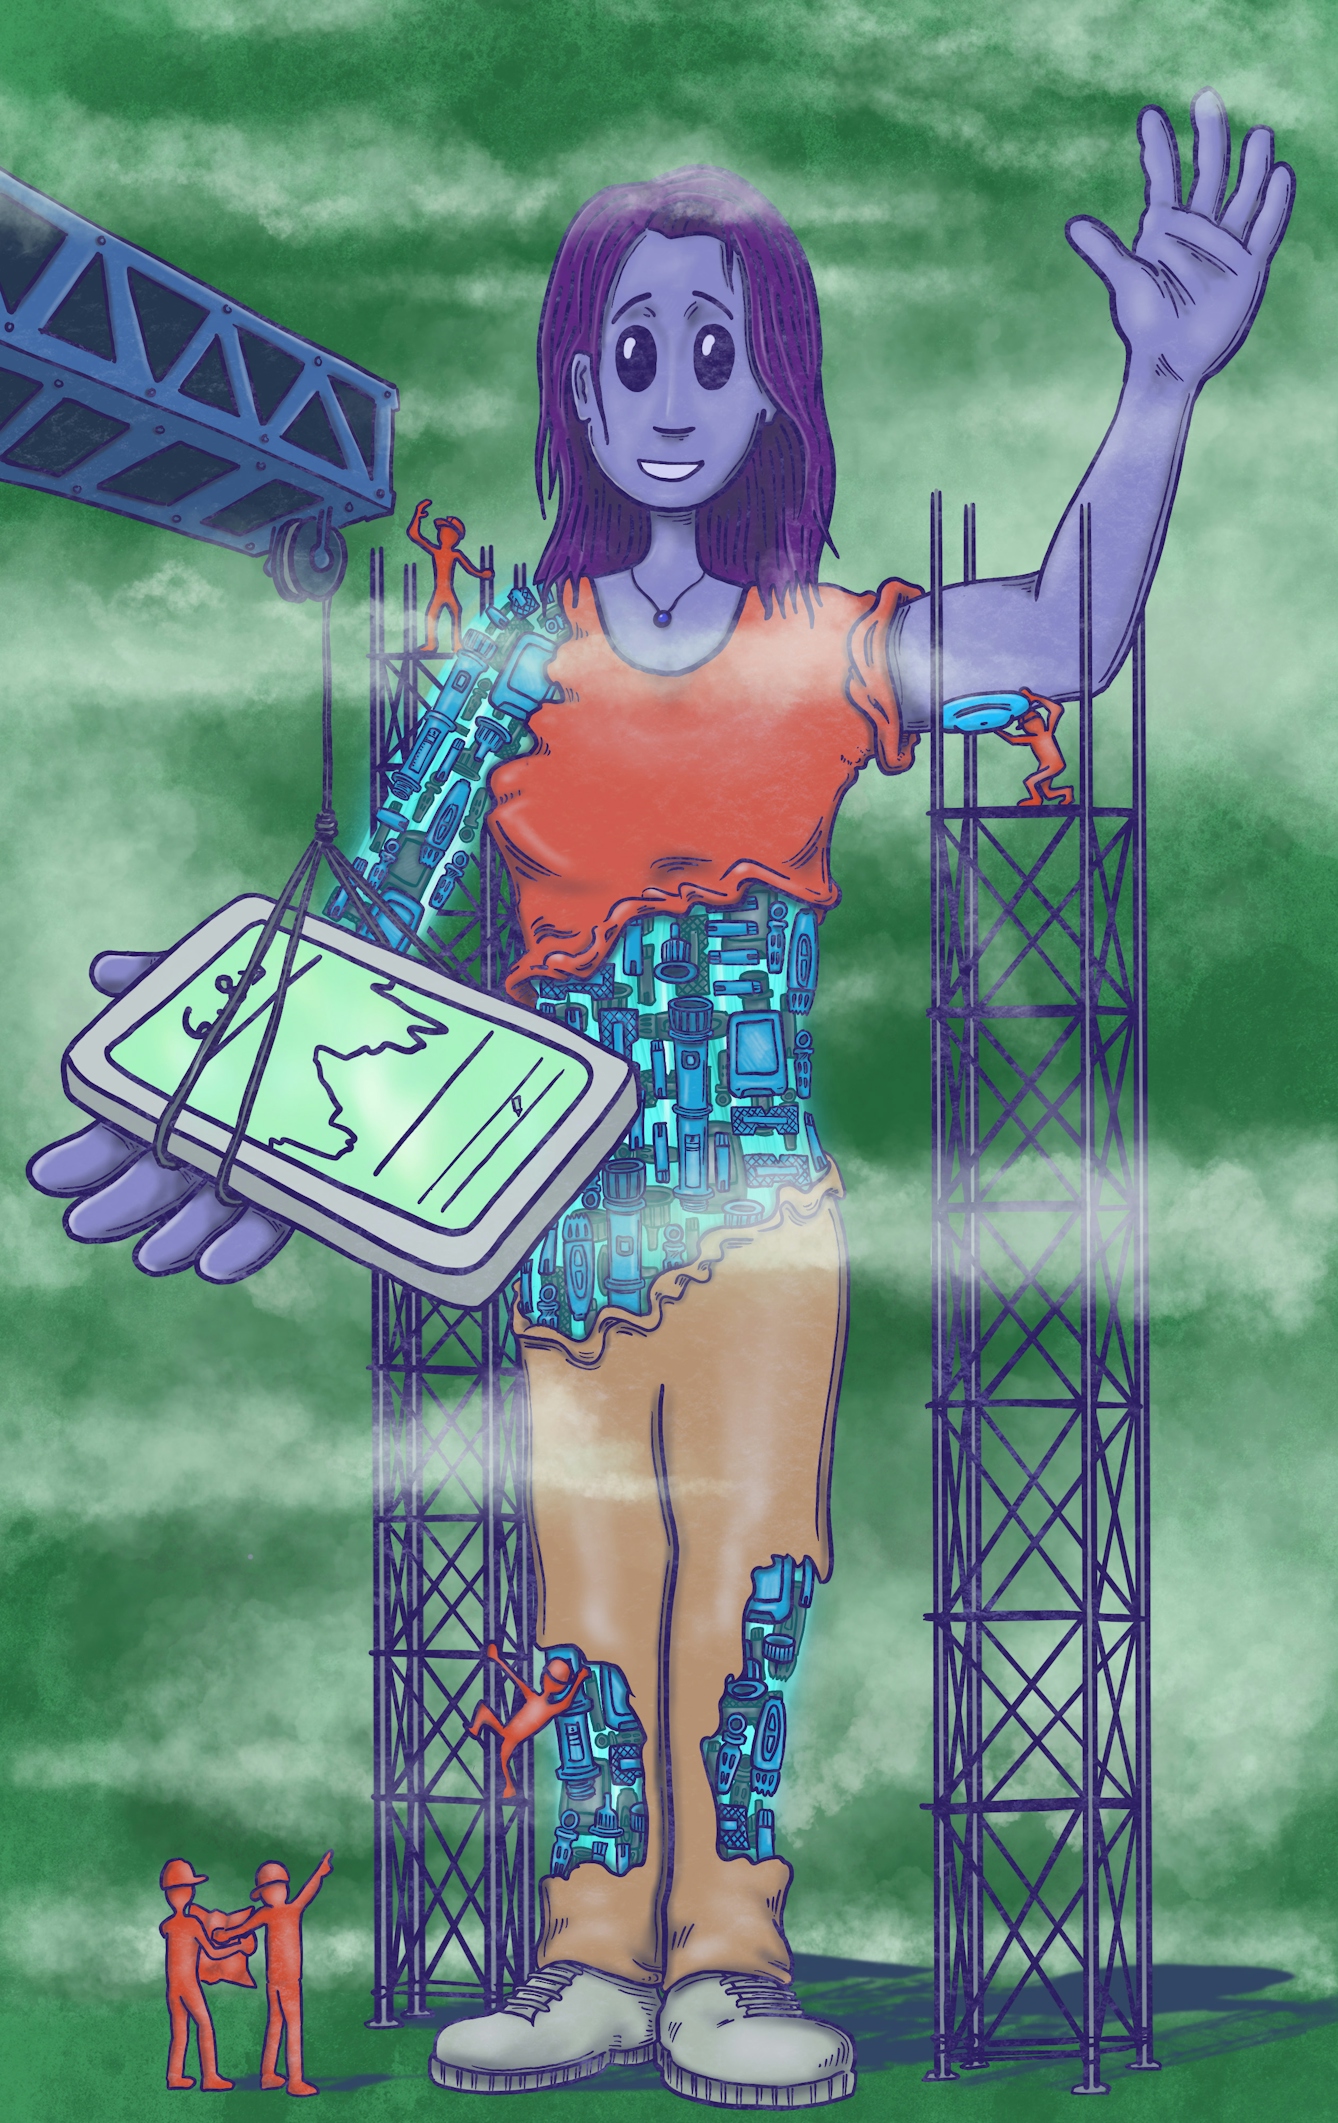 An illustration of a cyborg-like woman made up of diabetes monitoring technology. She is smiling and surrounded by tiny construction workers adding more devices.